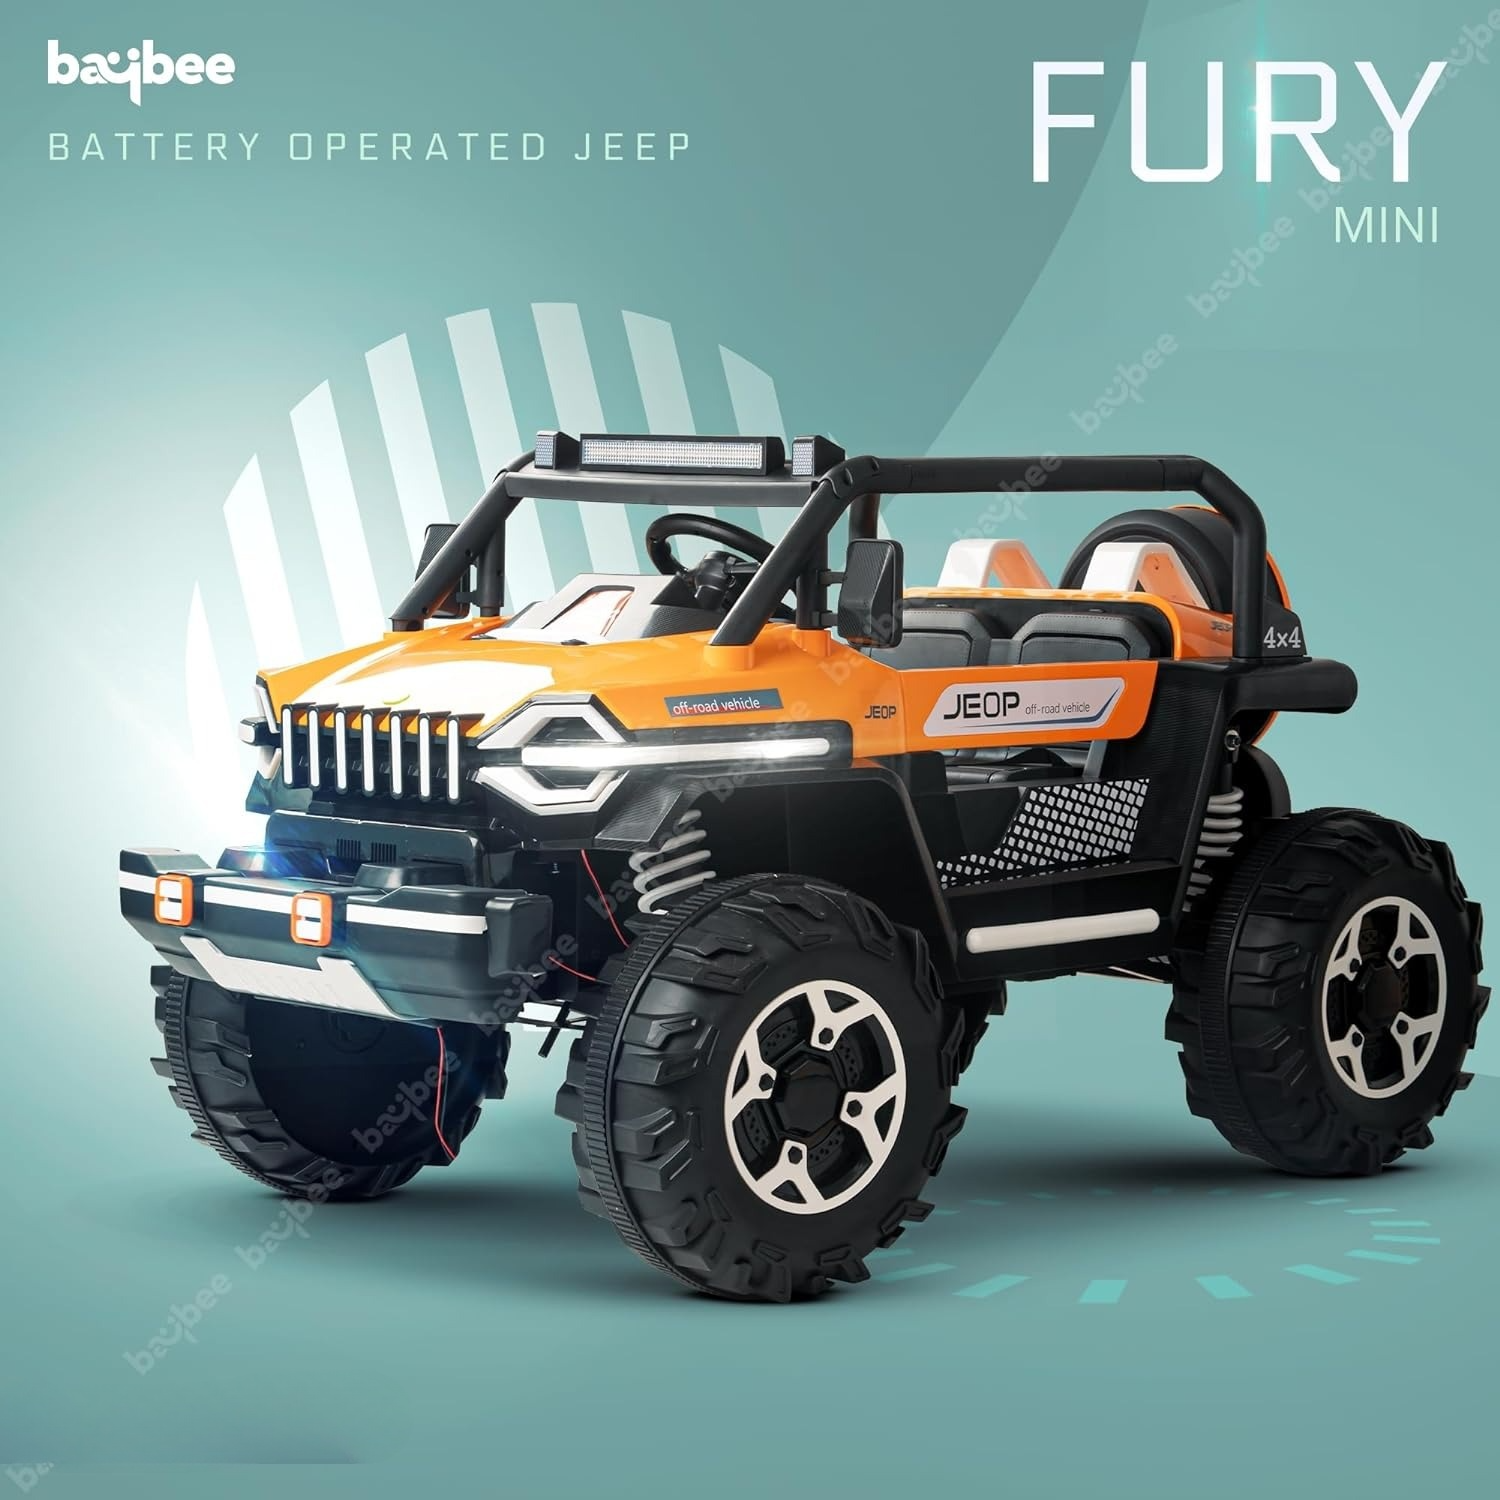 Minikin Fury 2x2 Rechargeable Jeep | Top End Configuration | Ages 1-8 Years